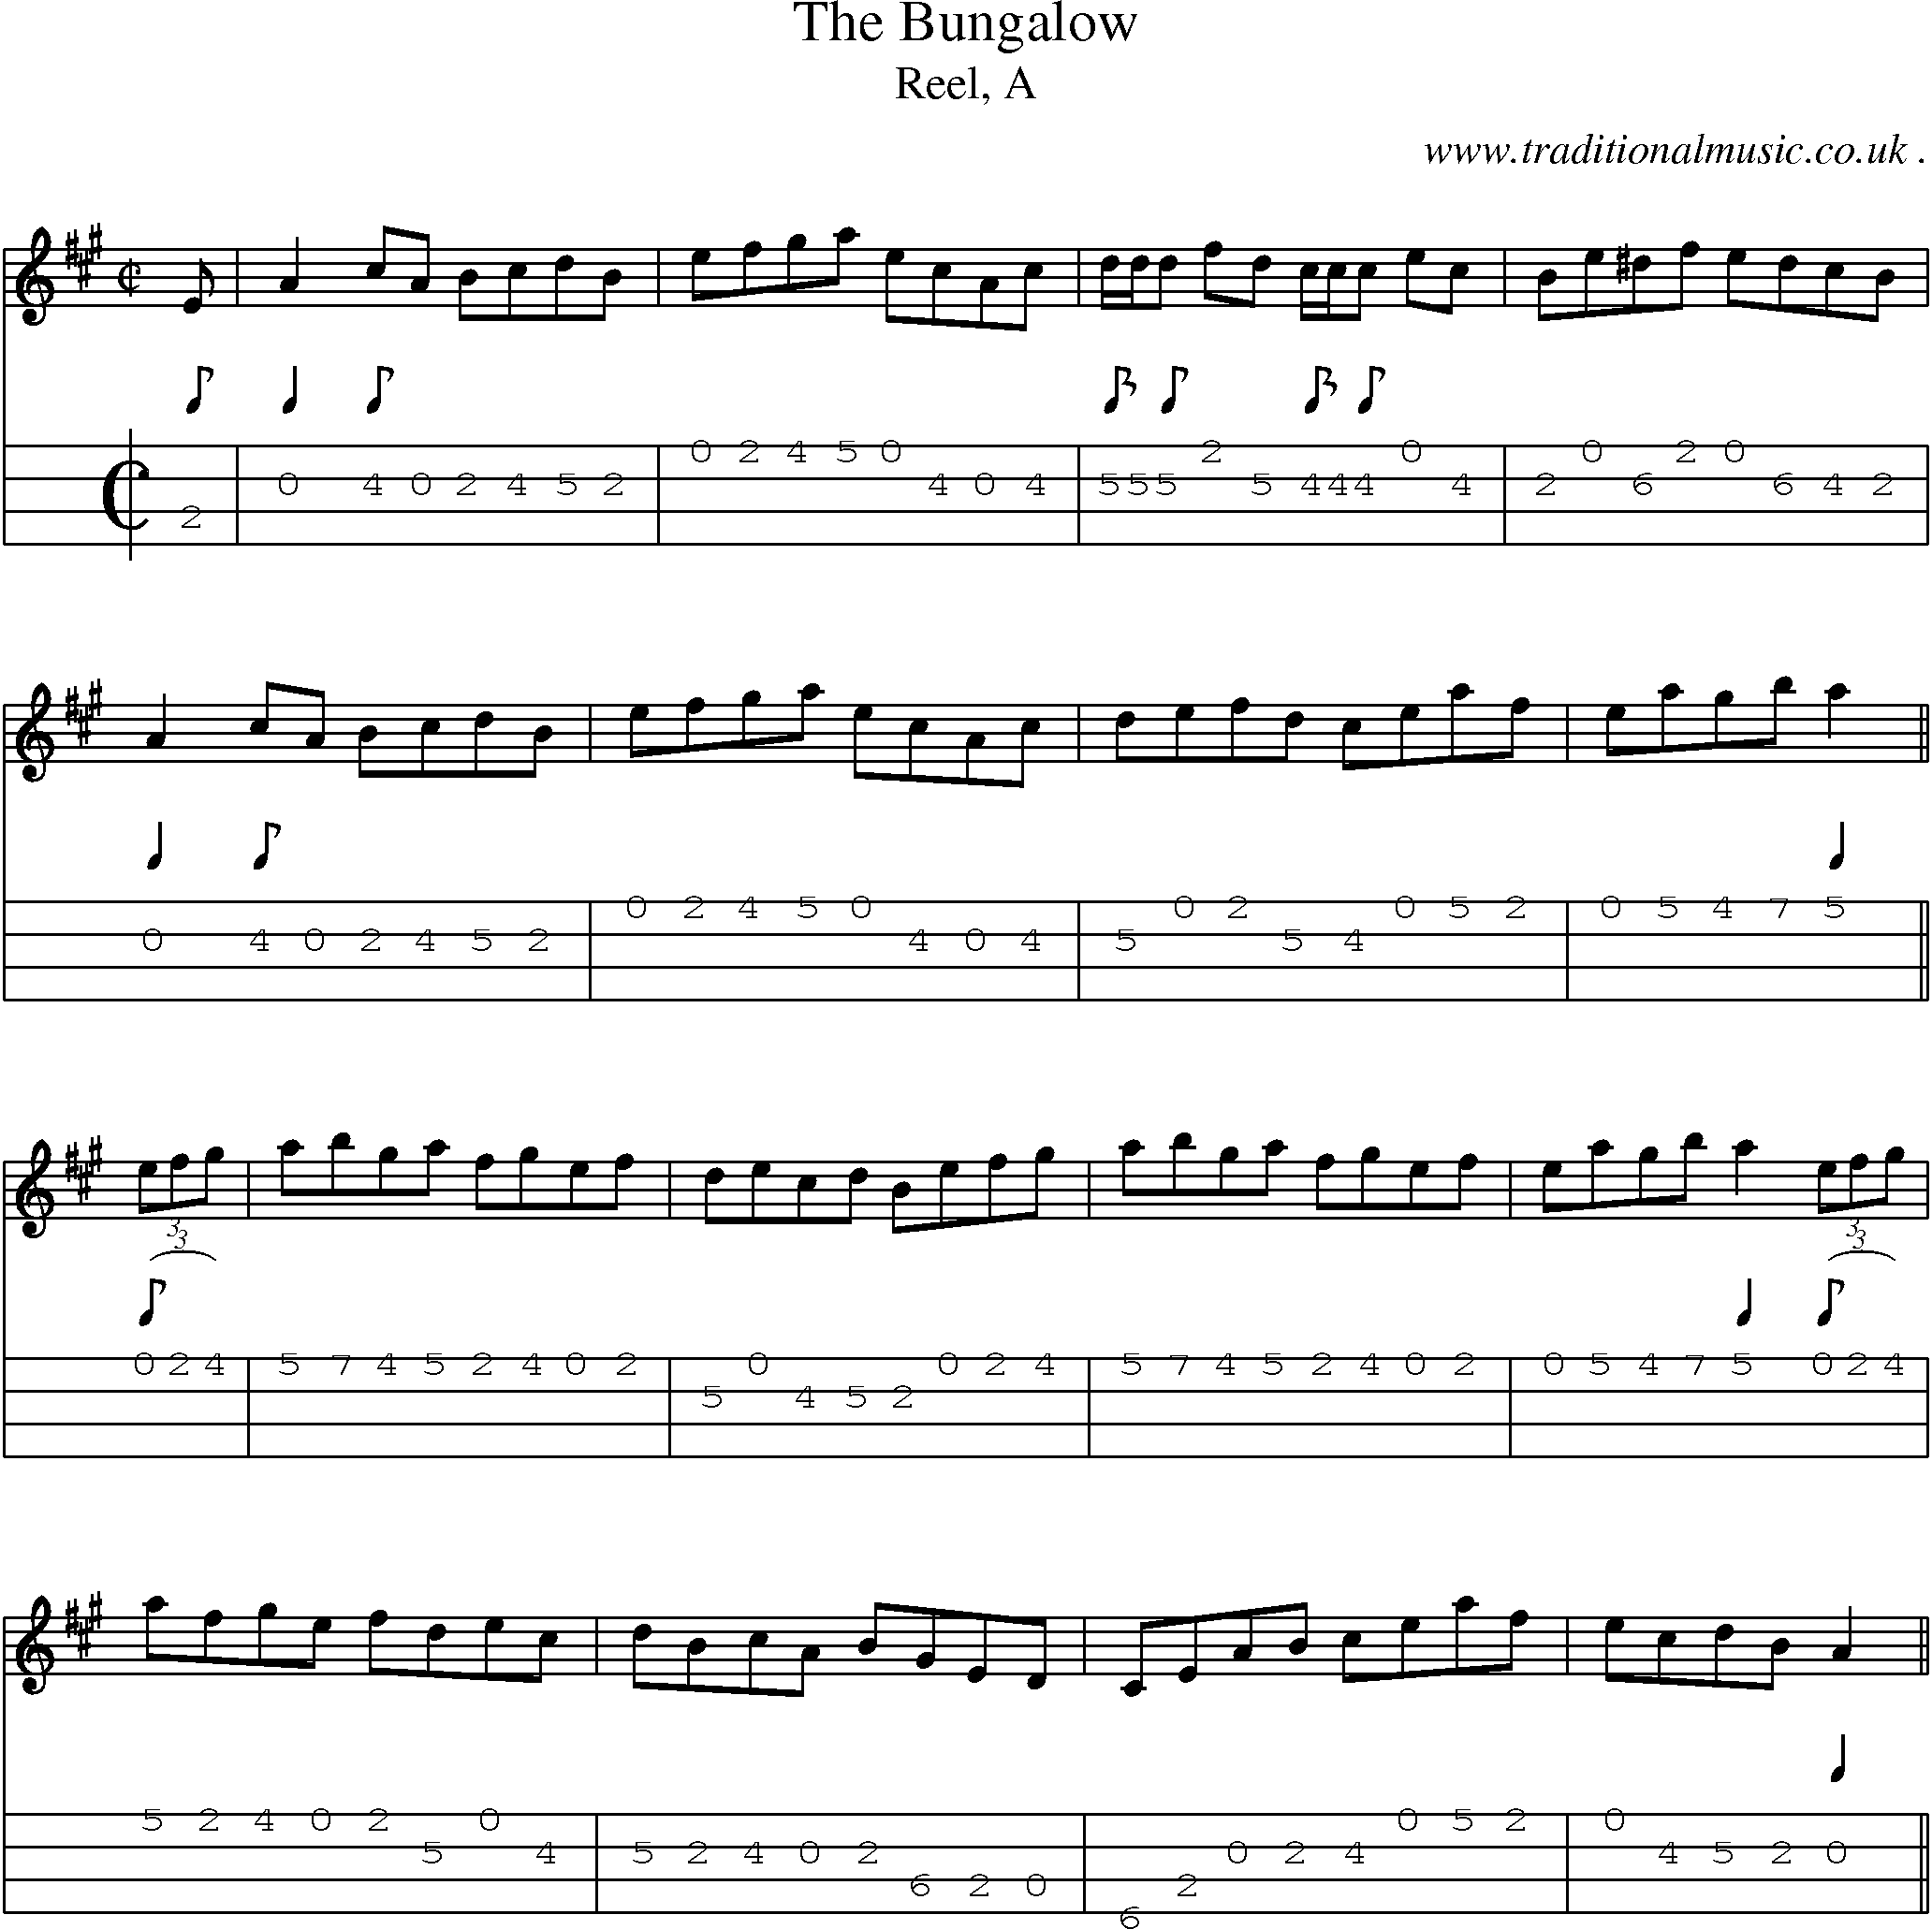 Sheet-music  score, Chords and Mandolin Tabs for The Bungalow